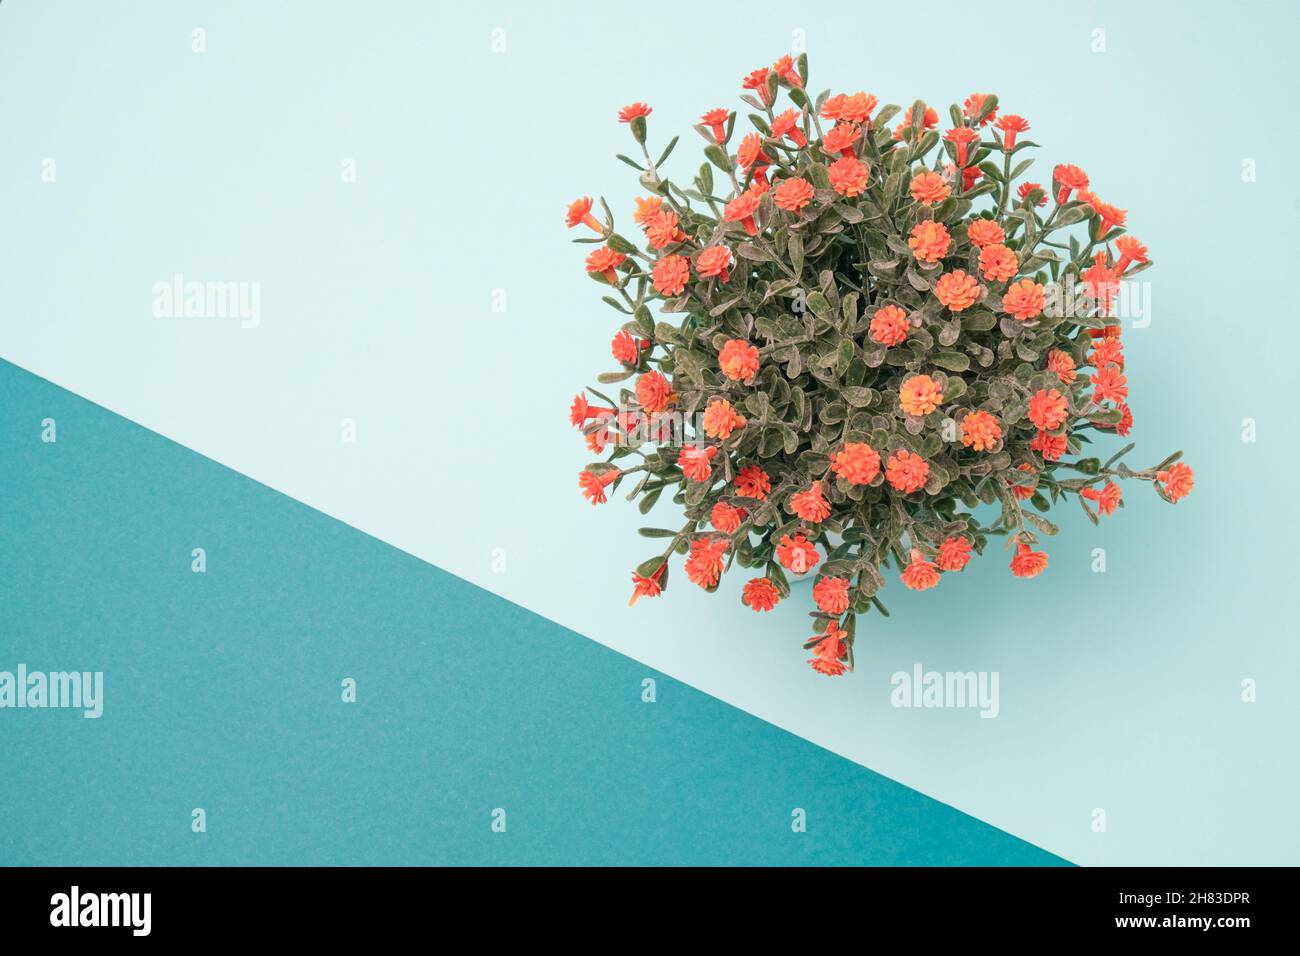 House plant with orange flowers in a pot against light blue background. Minimal design flat lay Stock Photo